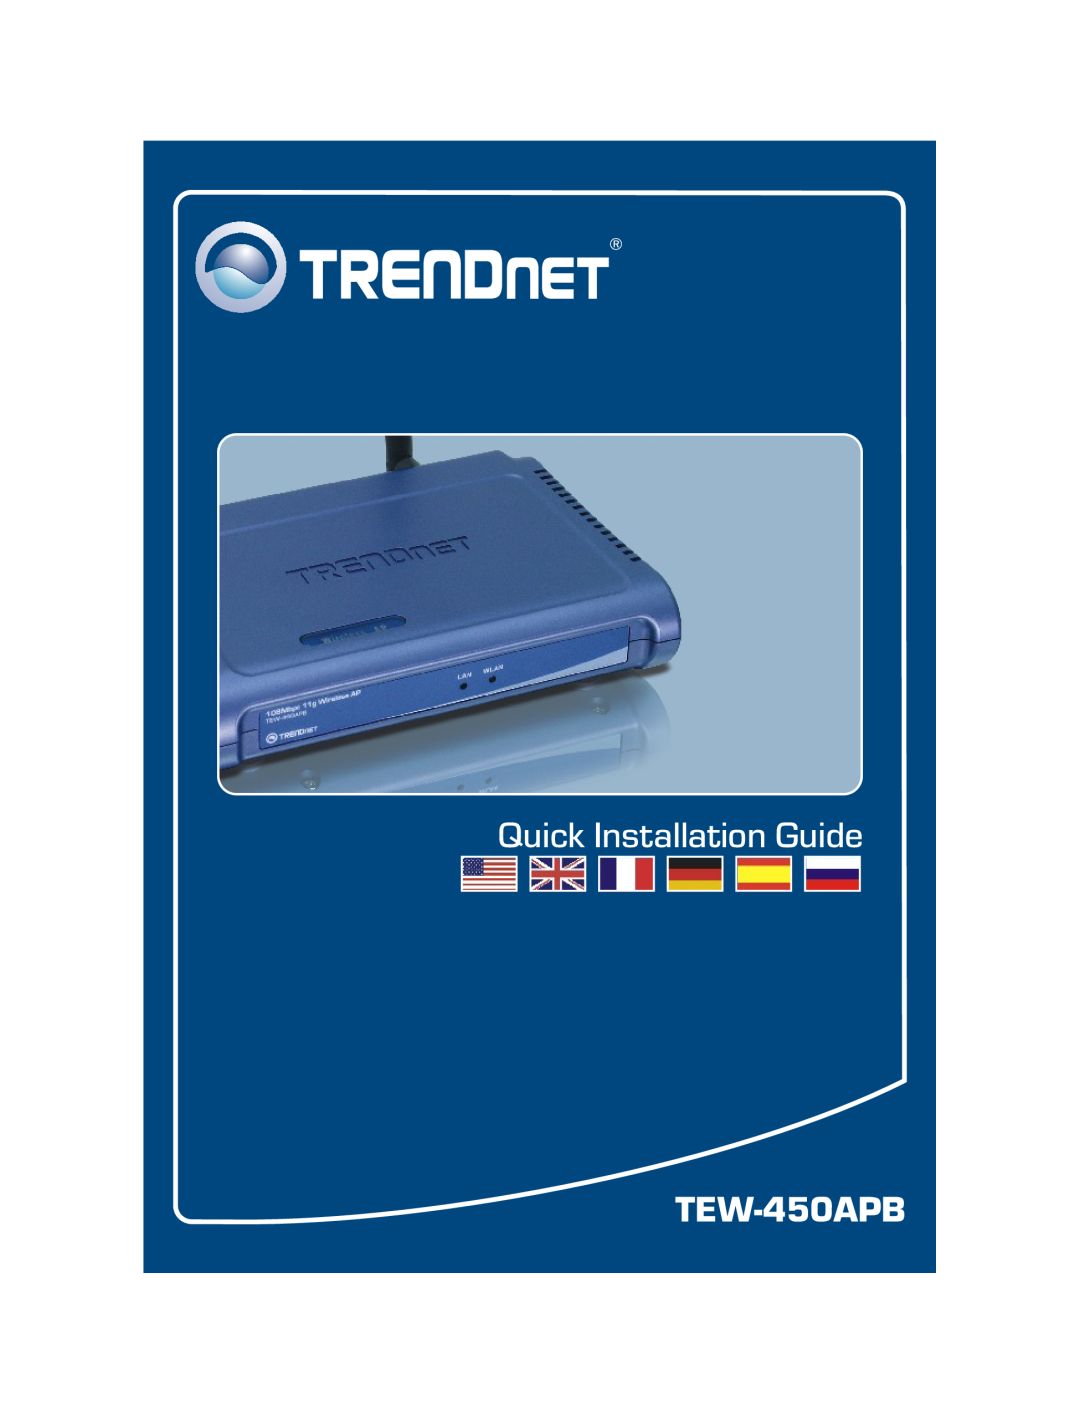 TRENDnet TEW-610APB manual Quick Installation Guide, TRENDnet, Whats Next in Networking, Version, TRENDware, USA 